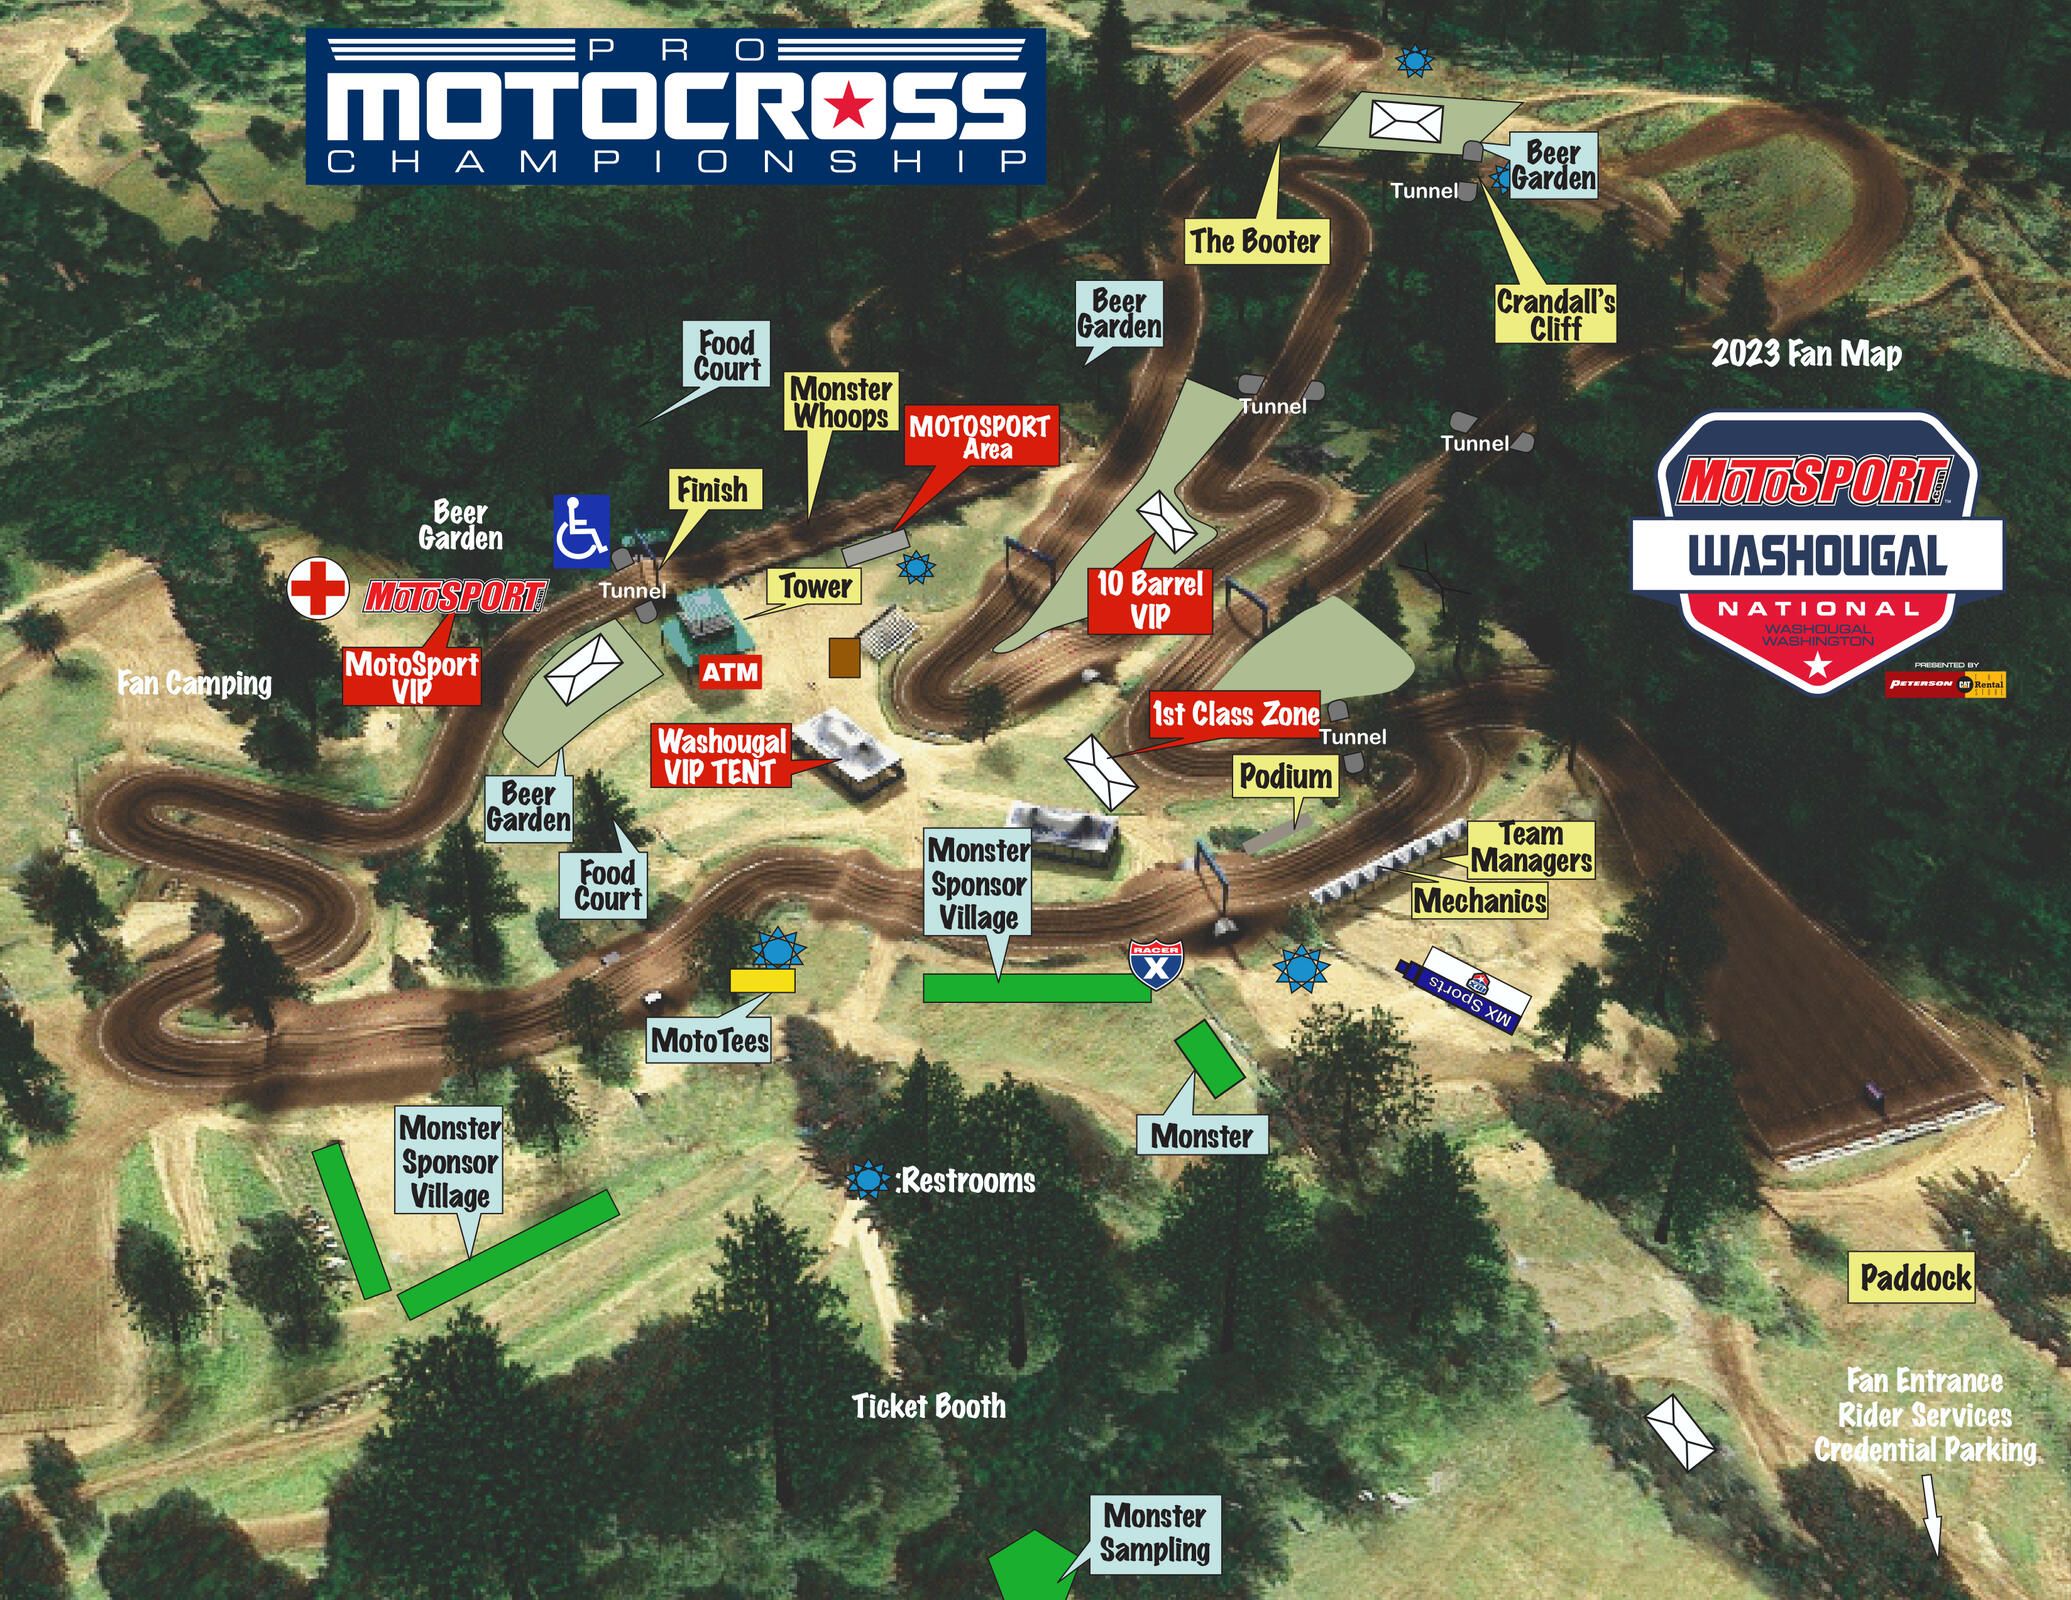 KEY INFO How To Watch Washougal Pro Motocross, Schedule and Track Map